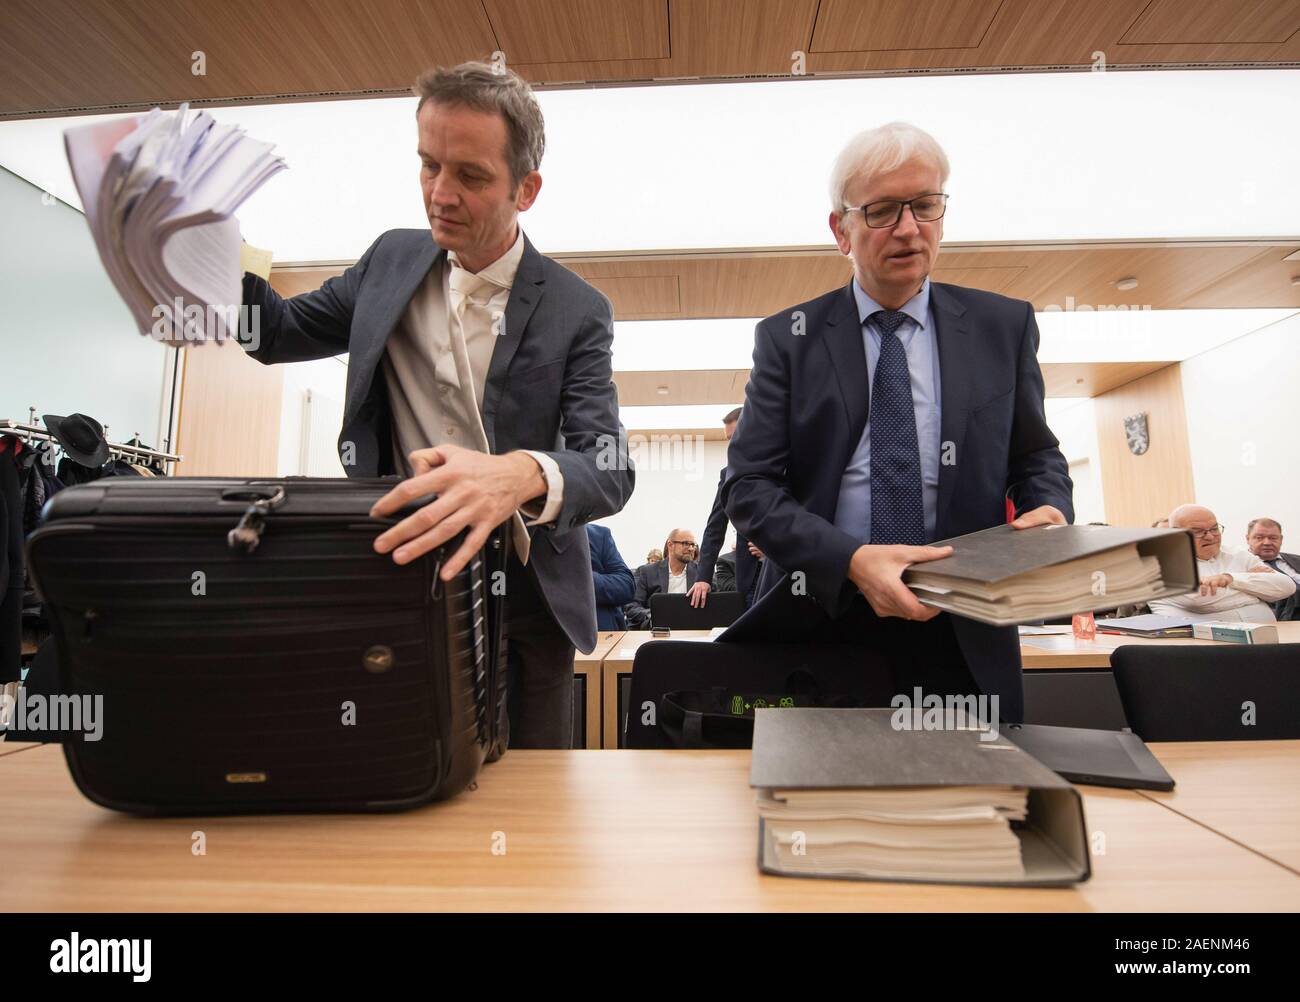 Kassel, Germany. 10th Dec, 2019. Jürgen Resch (r), Managing Director of Deutsche Umwelthilfe, and his lawyer Remo Klinger are standing at the same table with files before the trial begins in the Hessian Administrative Court. In an appeal against an action brought by Deutsche Umwelthilfe, the court is dealing with possible bans on diesel driving in the city of Frankfurt am Main. Credit: Swen Pförtner/dpa/Alamy Live News Stock Photo